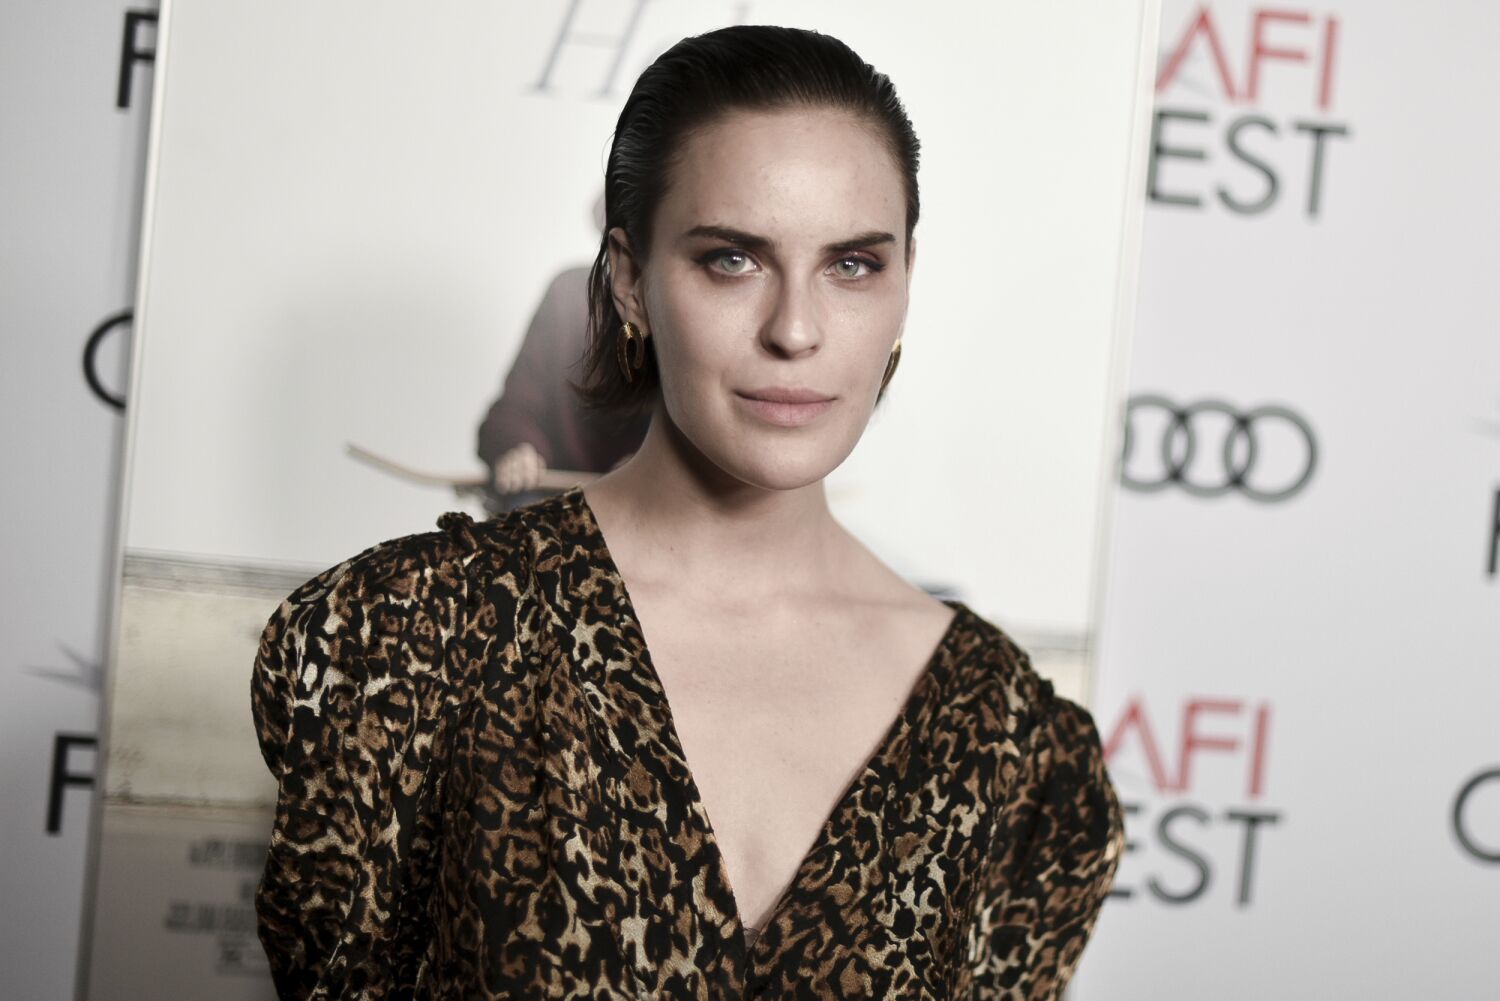 Tallulah Willis knew 'something was wrong' before Bruce Willis' dementia diagnosis